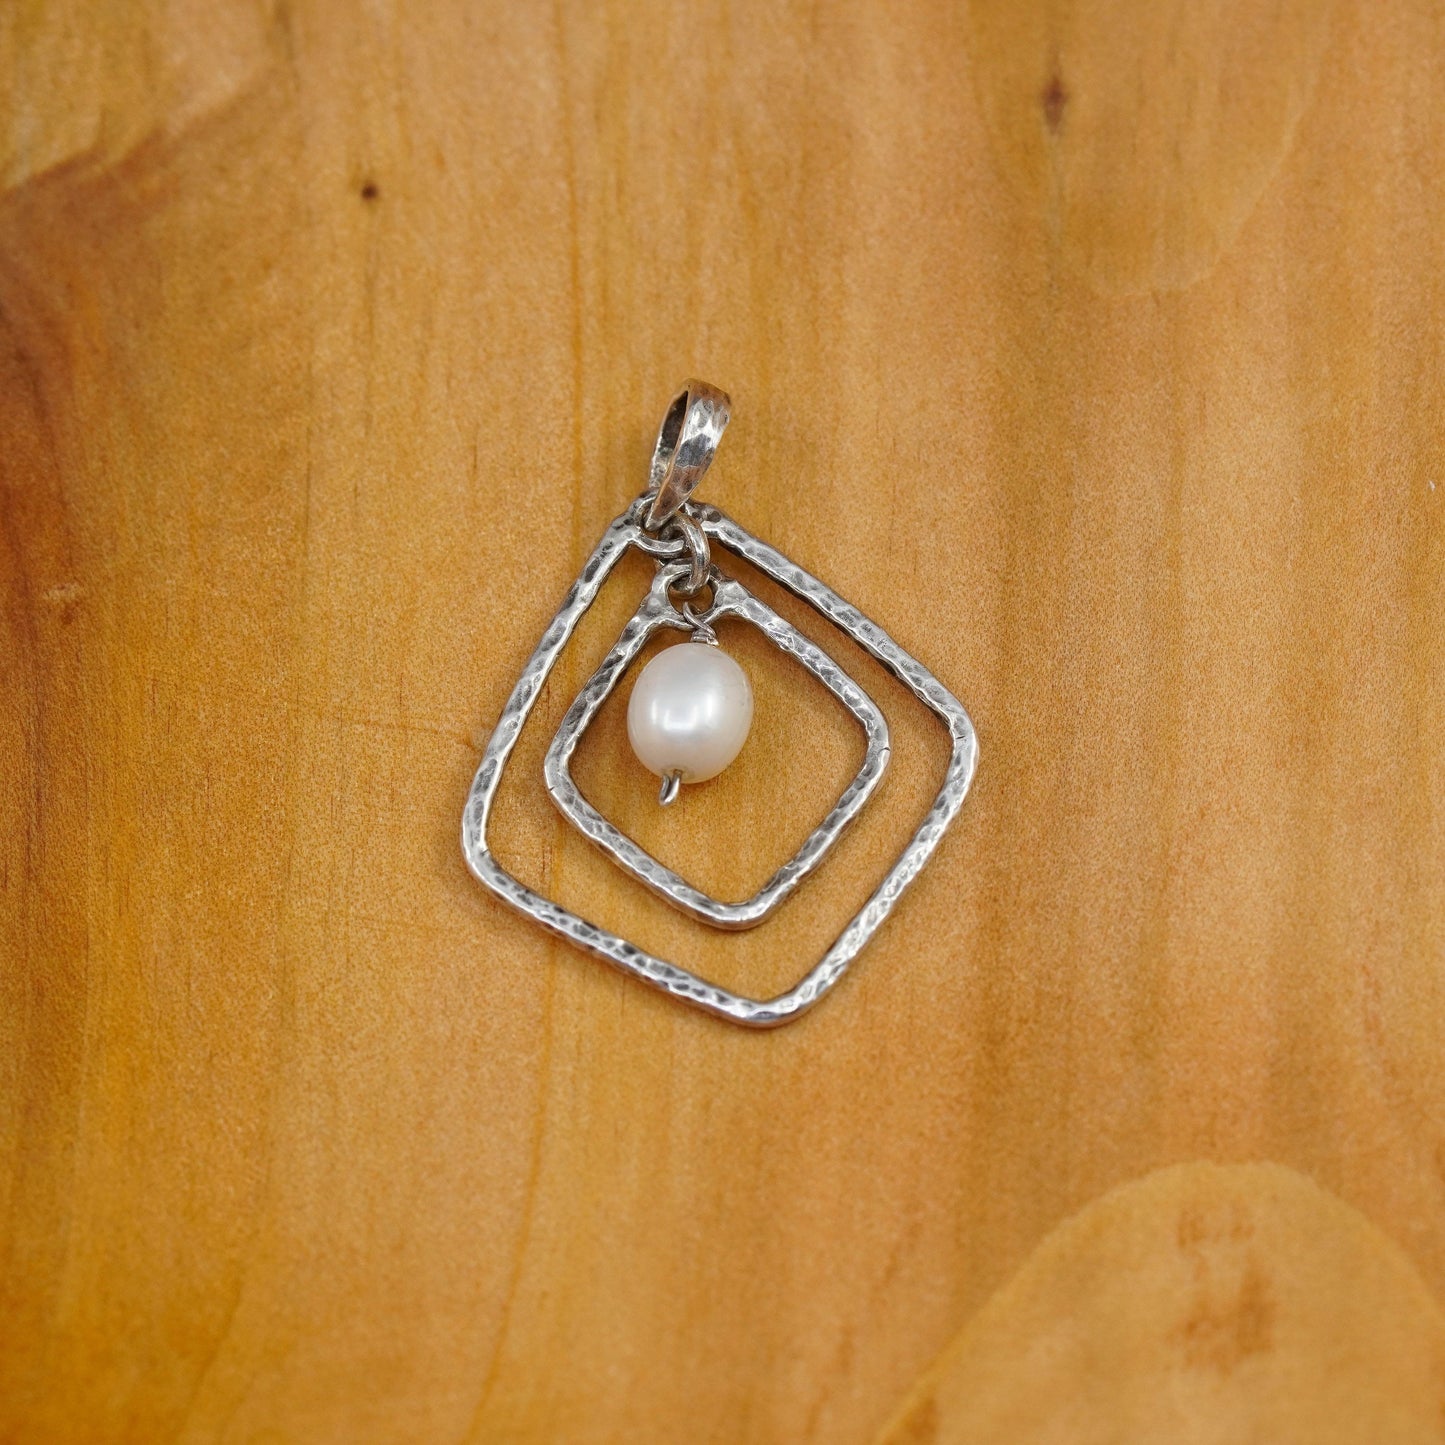 Vintage Sterling 925 silver handmade pendant with freshwater pearl